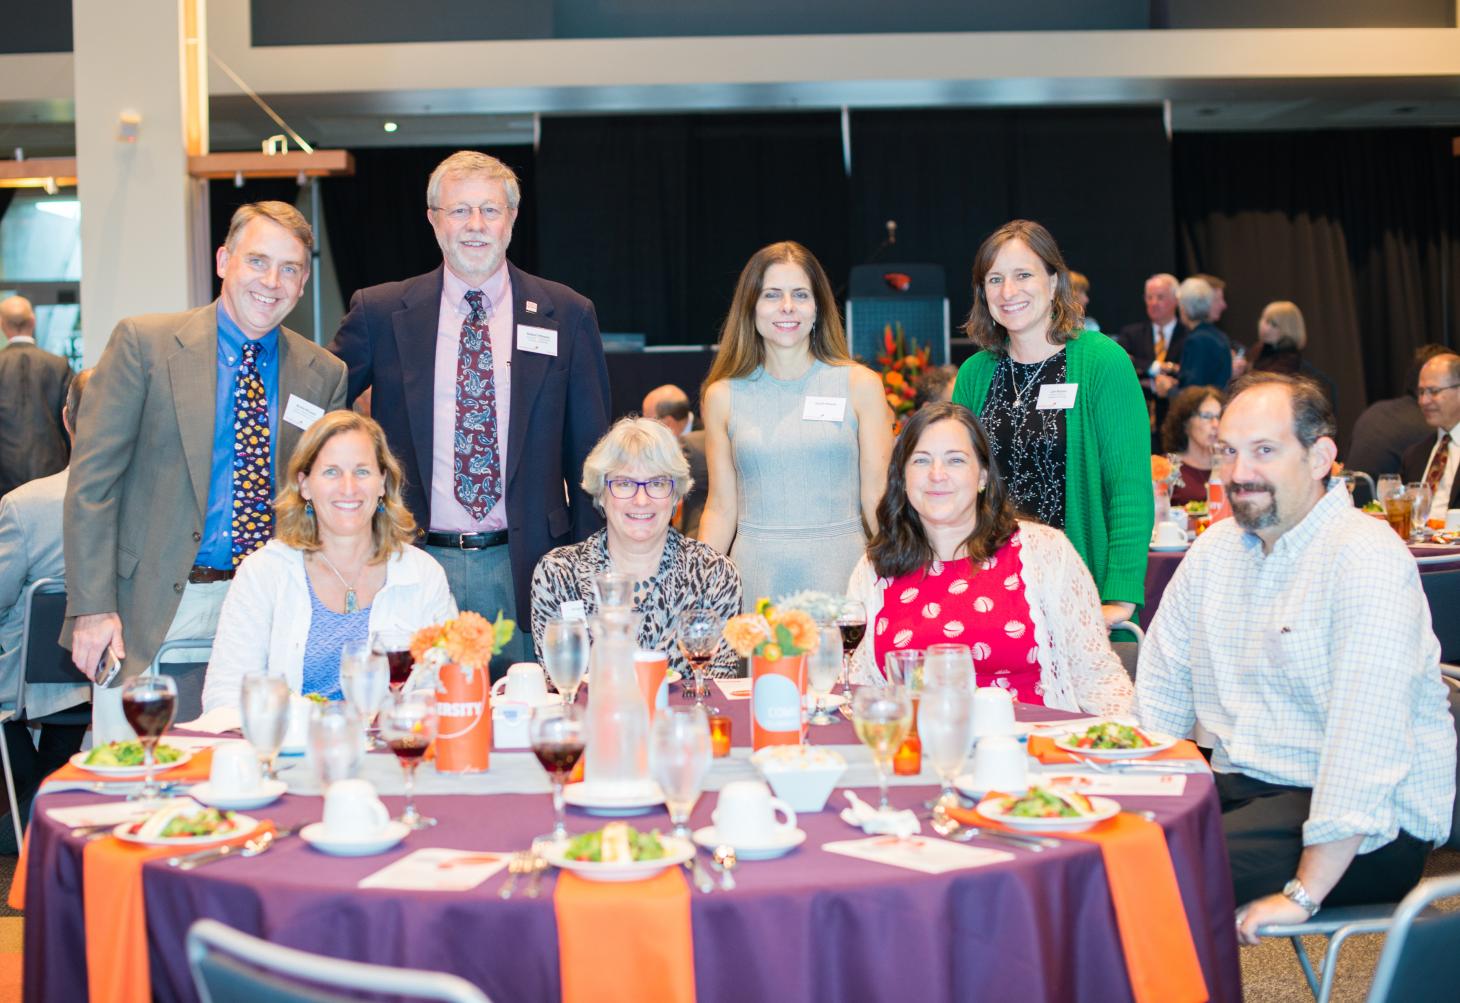 A group of Integrative Biology faculty and advisors and their guests celebrate at University Day dinner